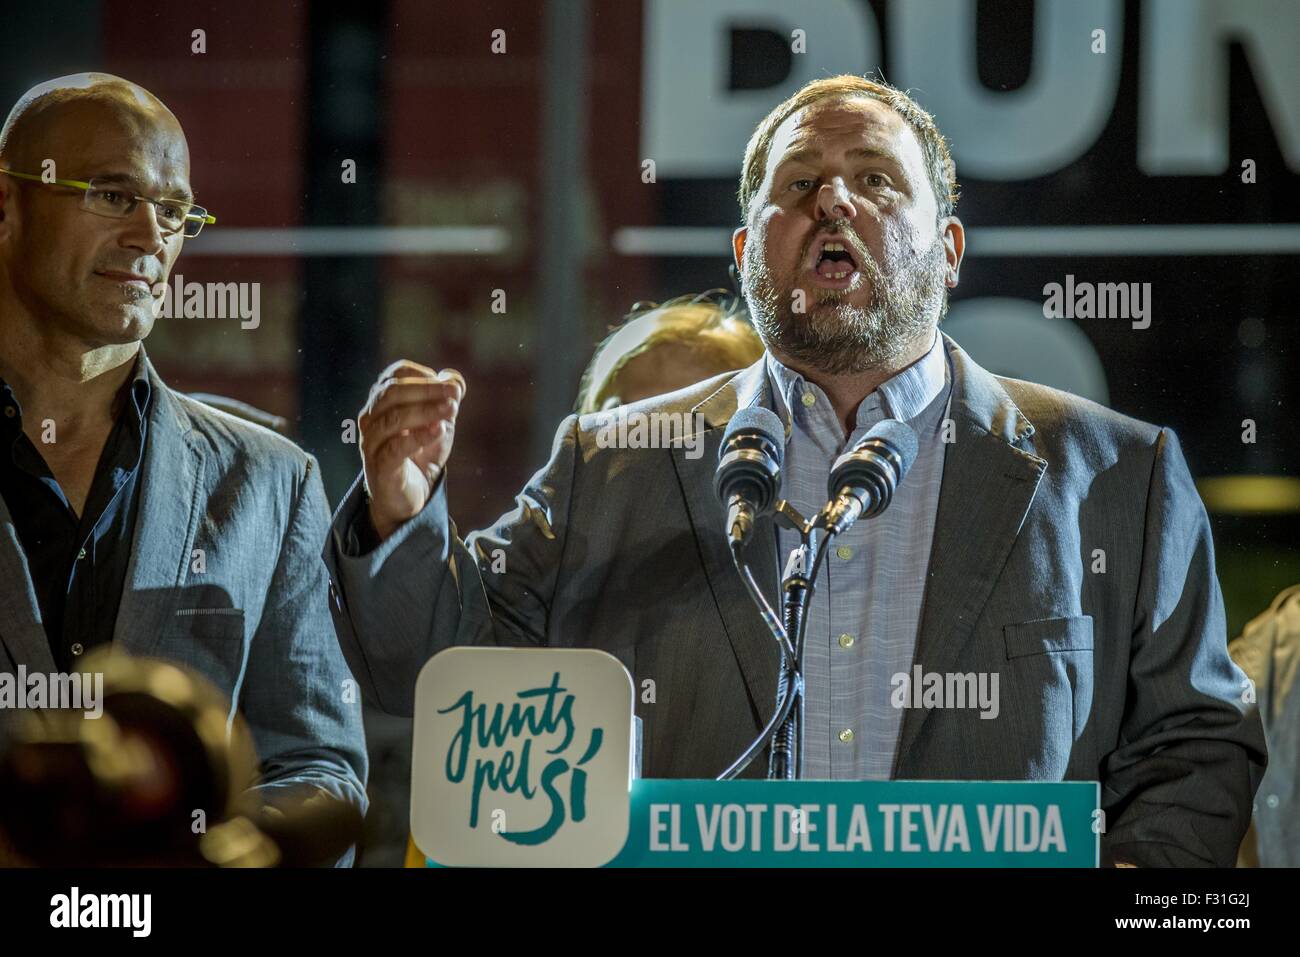 Barcelona, Catalonia, Spain. 27th Sep, 2015. ORIOL JUNQUERAS, president of the ERC party and number 5 of the pro-independence cross-party electoral list 'Junts pel Si' (Together for the yes) delivers a lively speech to hundreds of supporters during the Election Night party at Barcelona's Mercat del Born. © Matthias Oesterle/ZUMA Wire/Alamy Live News Stock Photo